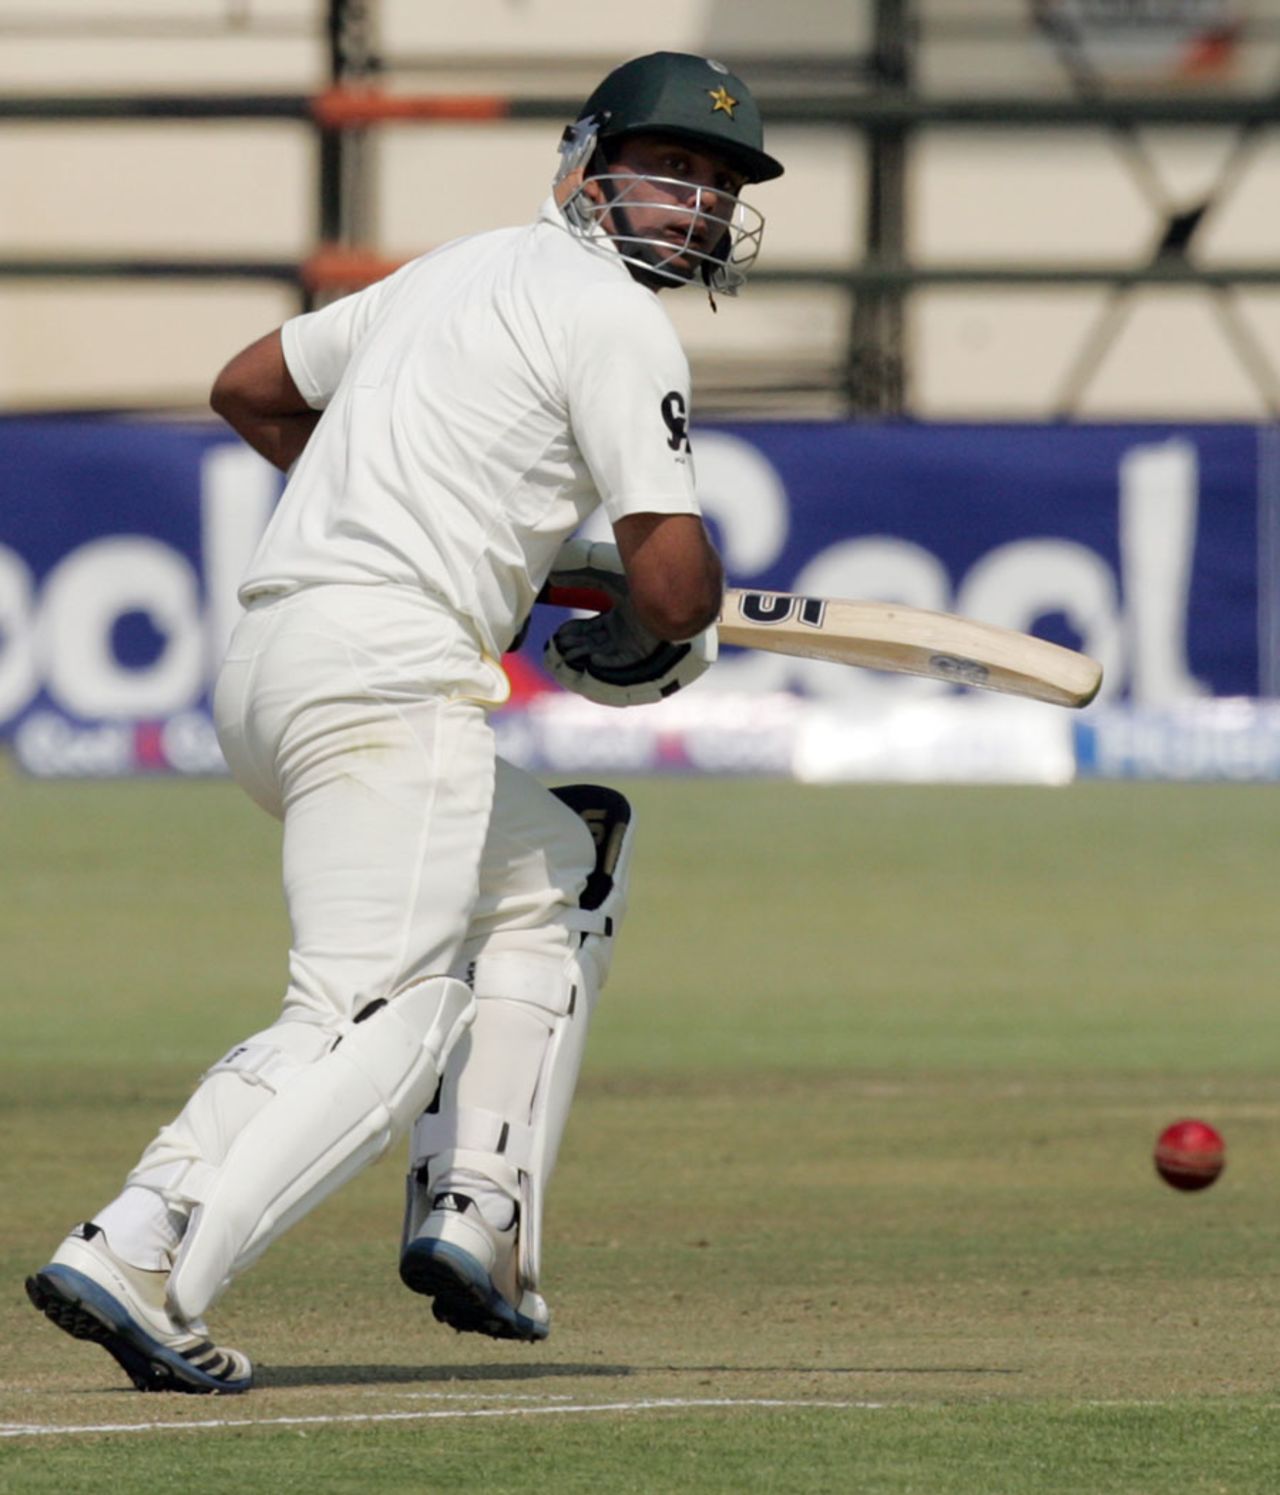 Khurram Manzoor scored 51 in the first innings, Zimbabwe v Pakistan, 2nd Test, Harare, 2nd day, September 11, 2013